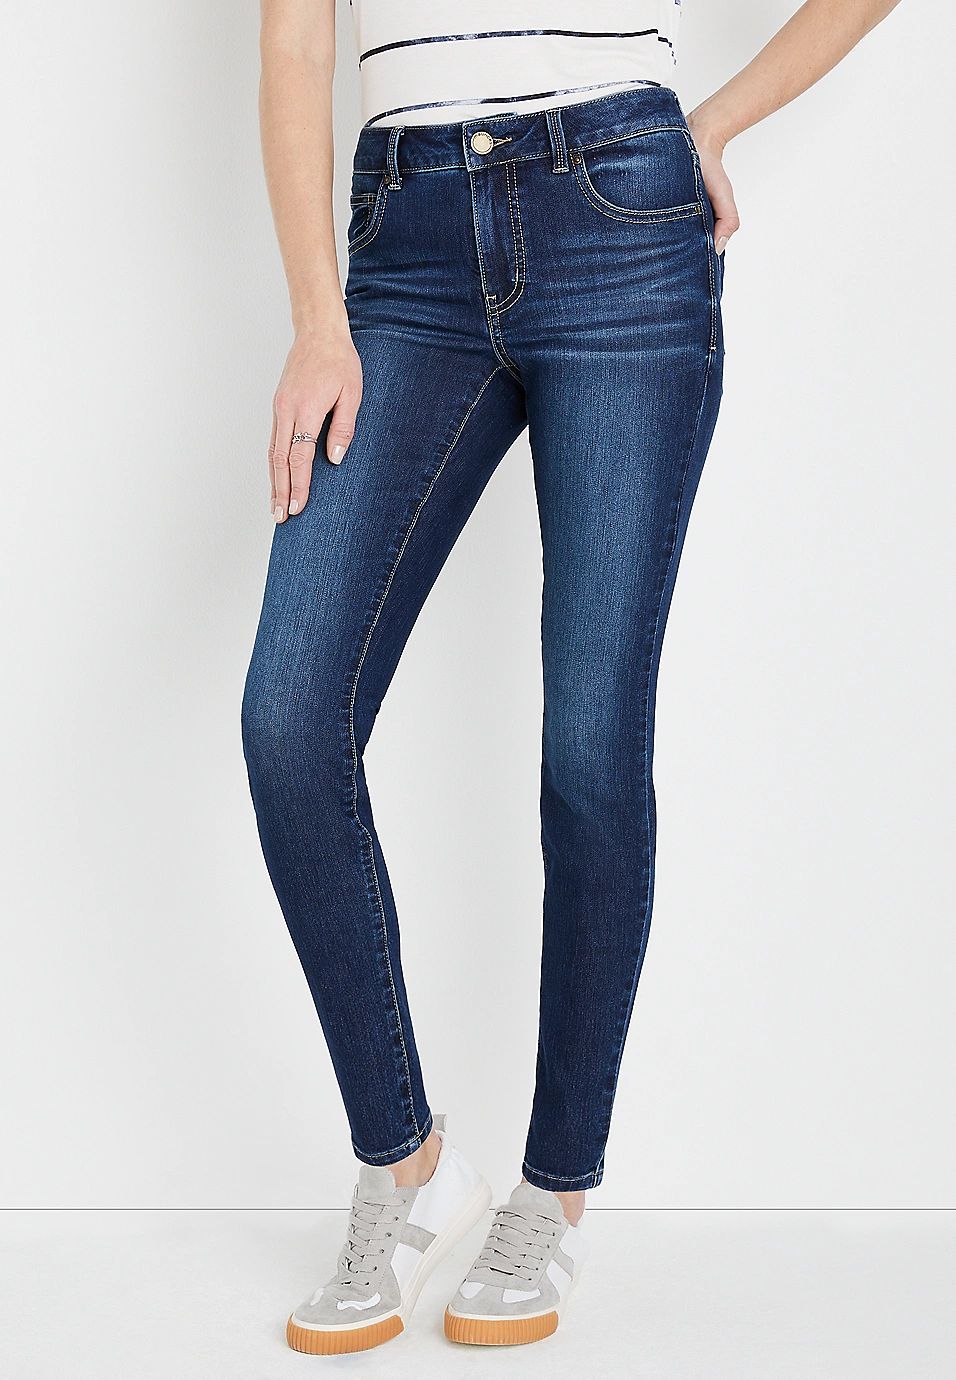 m jeans by maurices™ Everflex™ Super Skinny Mid Fit Mid Rise Jean | Maurices